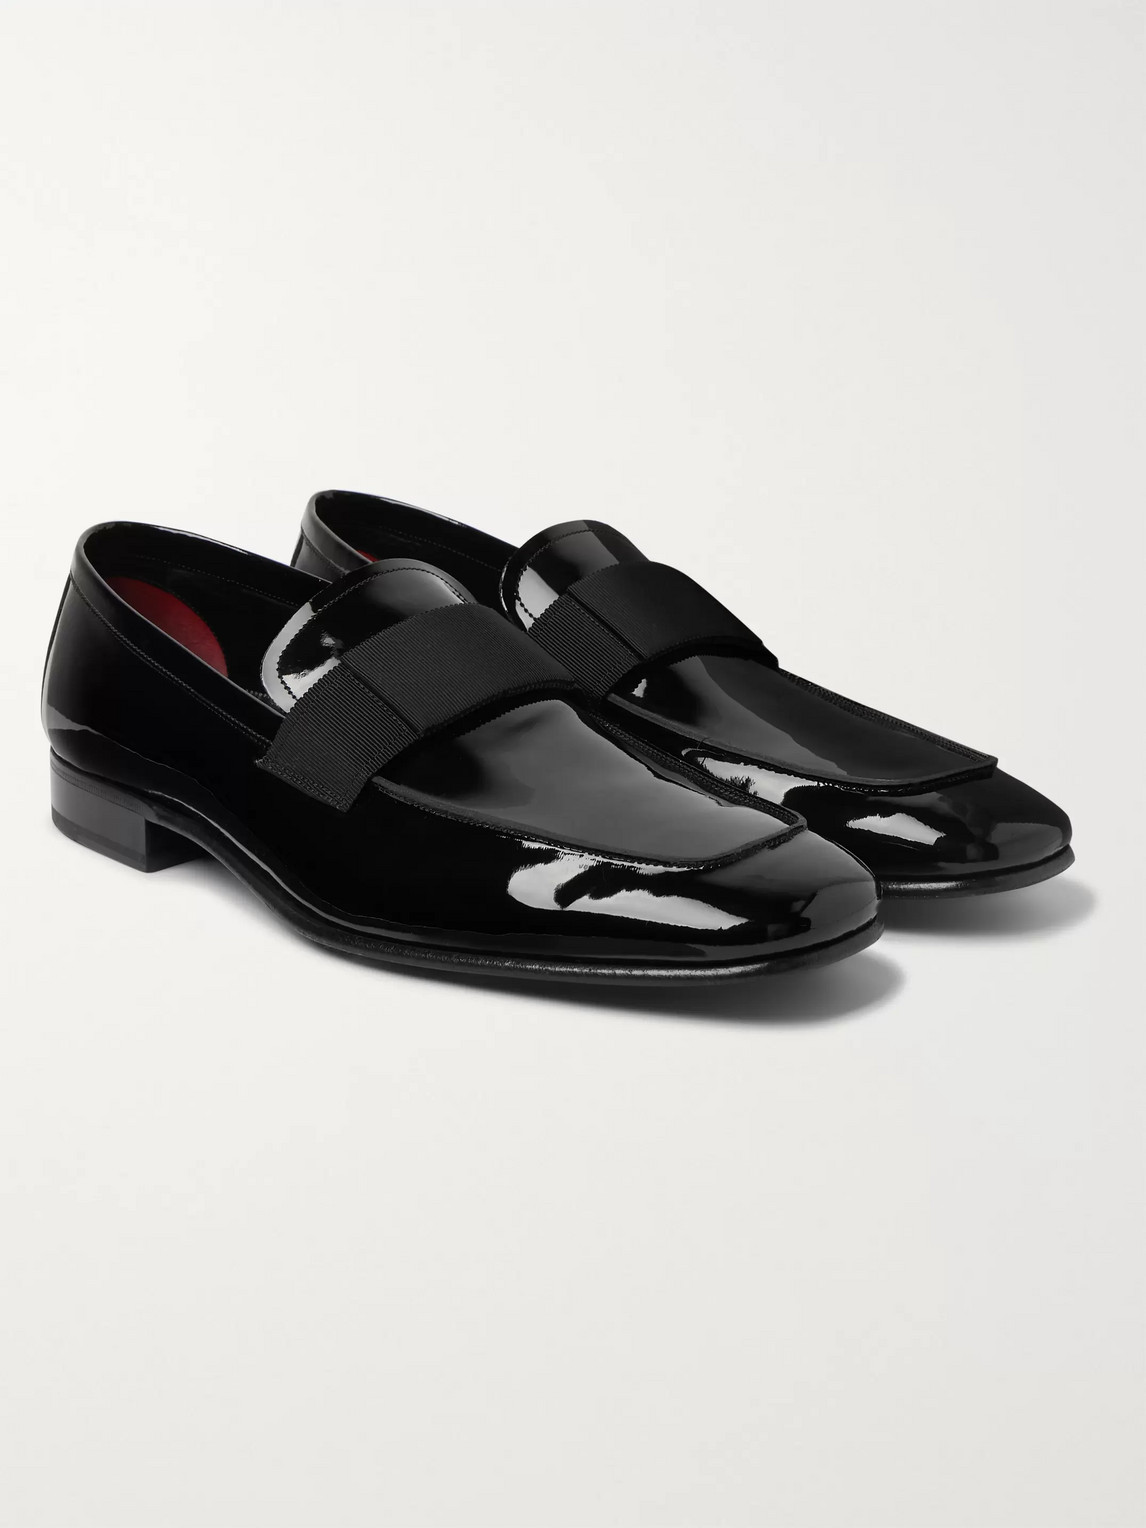 TOM FORD GROSGRAIN-TRIMMED PATENT-LEATHER LOAFERS